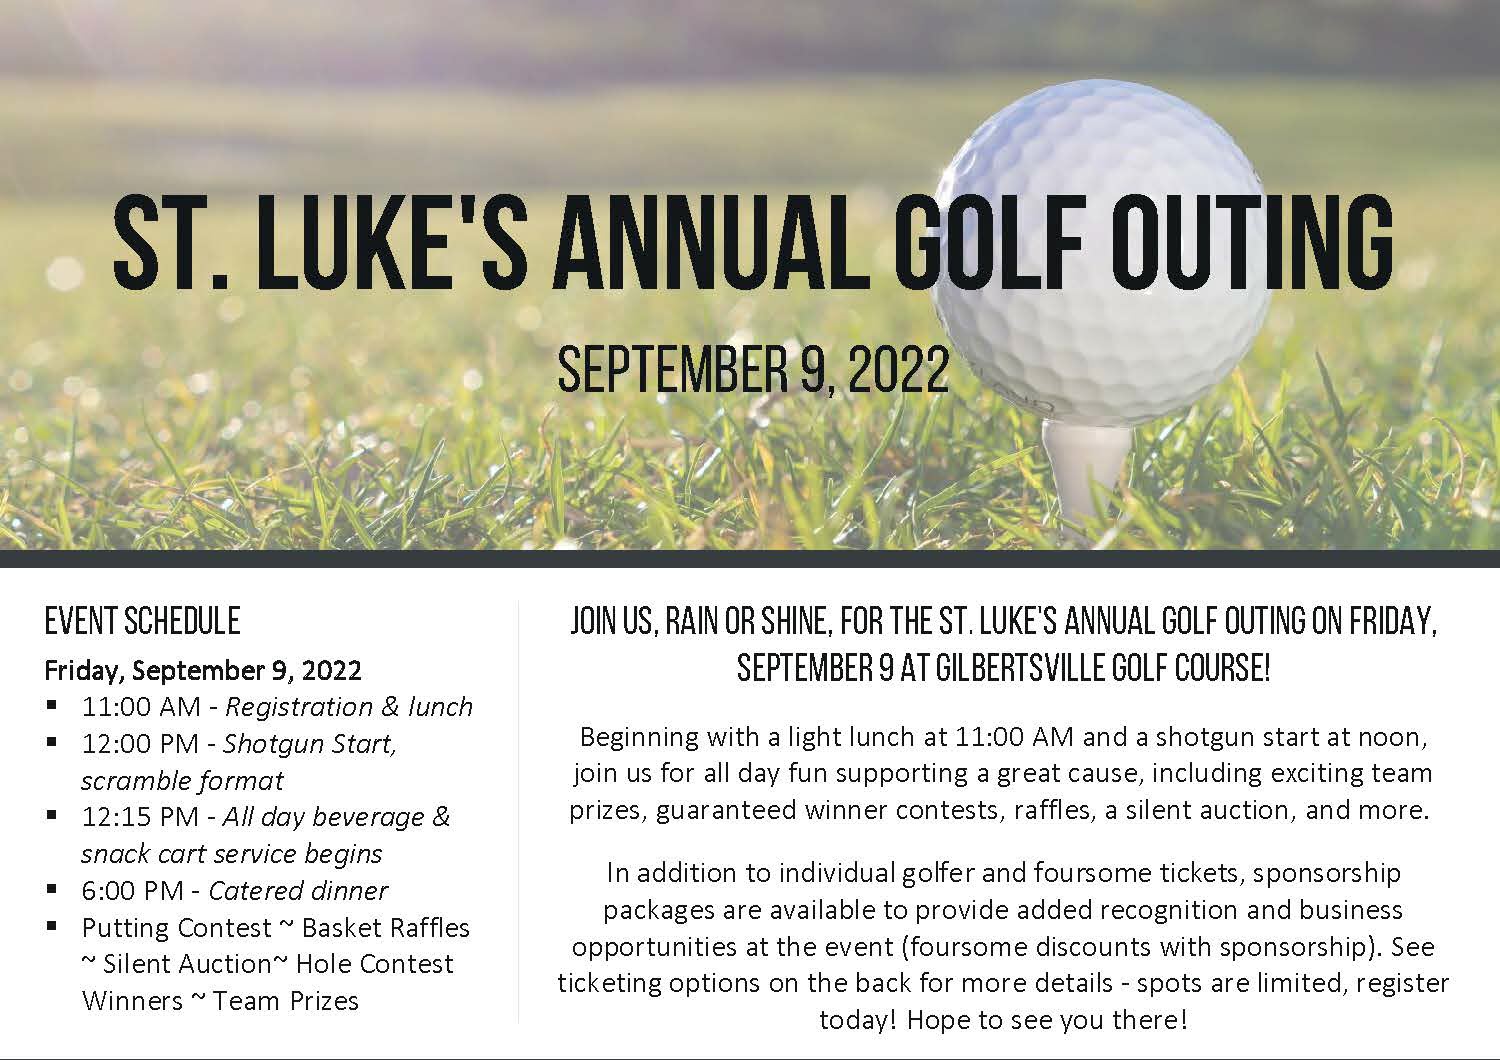 St. Luke's Annual Golf Outing 2022